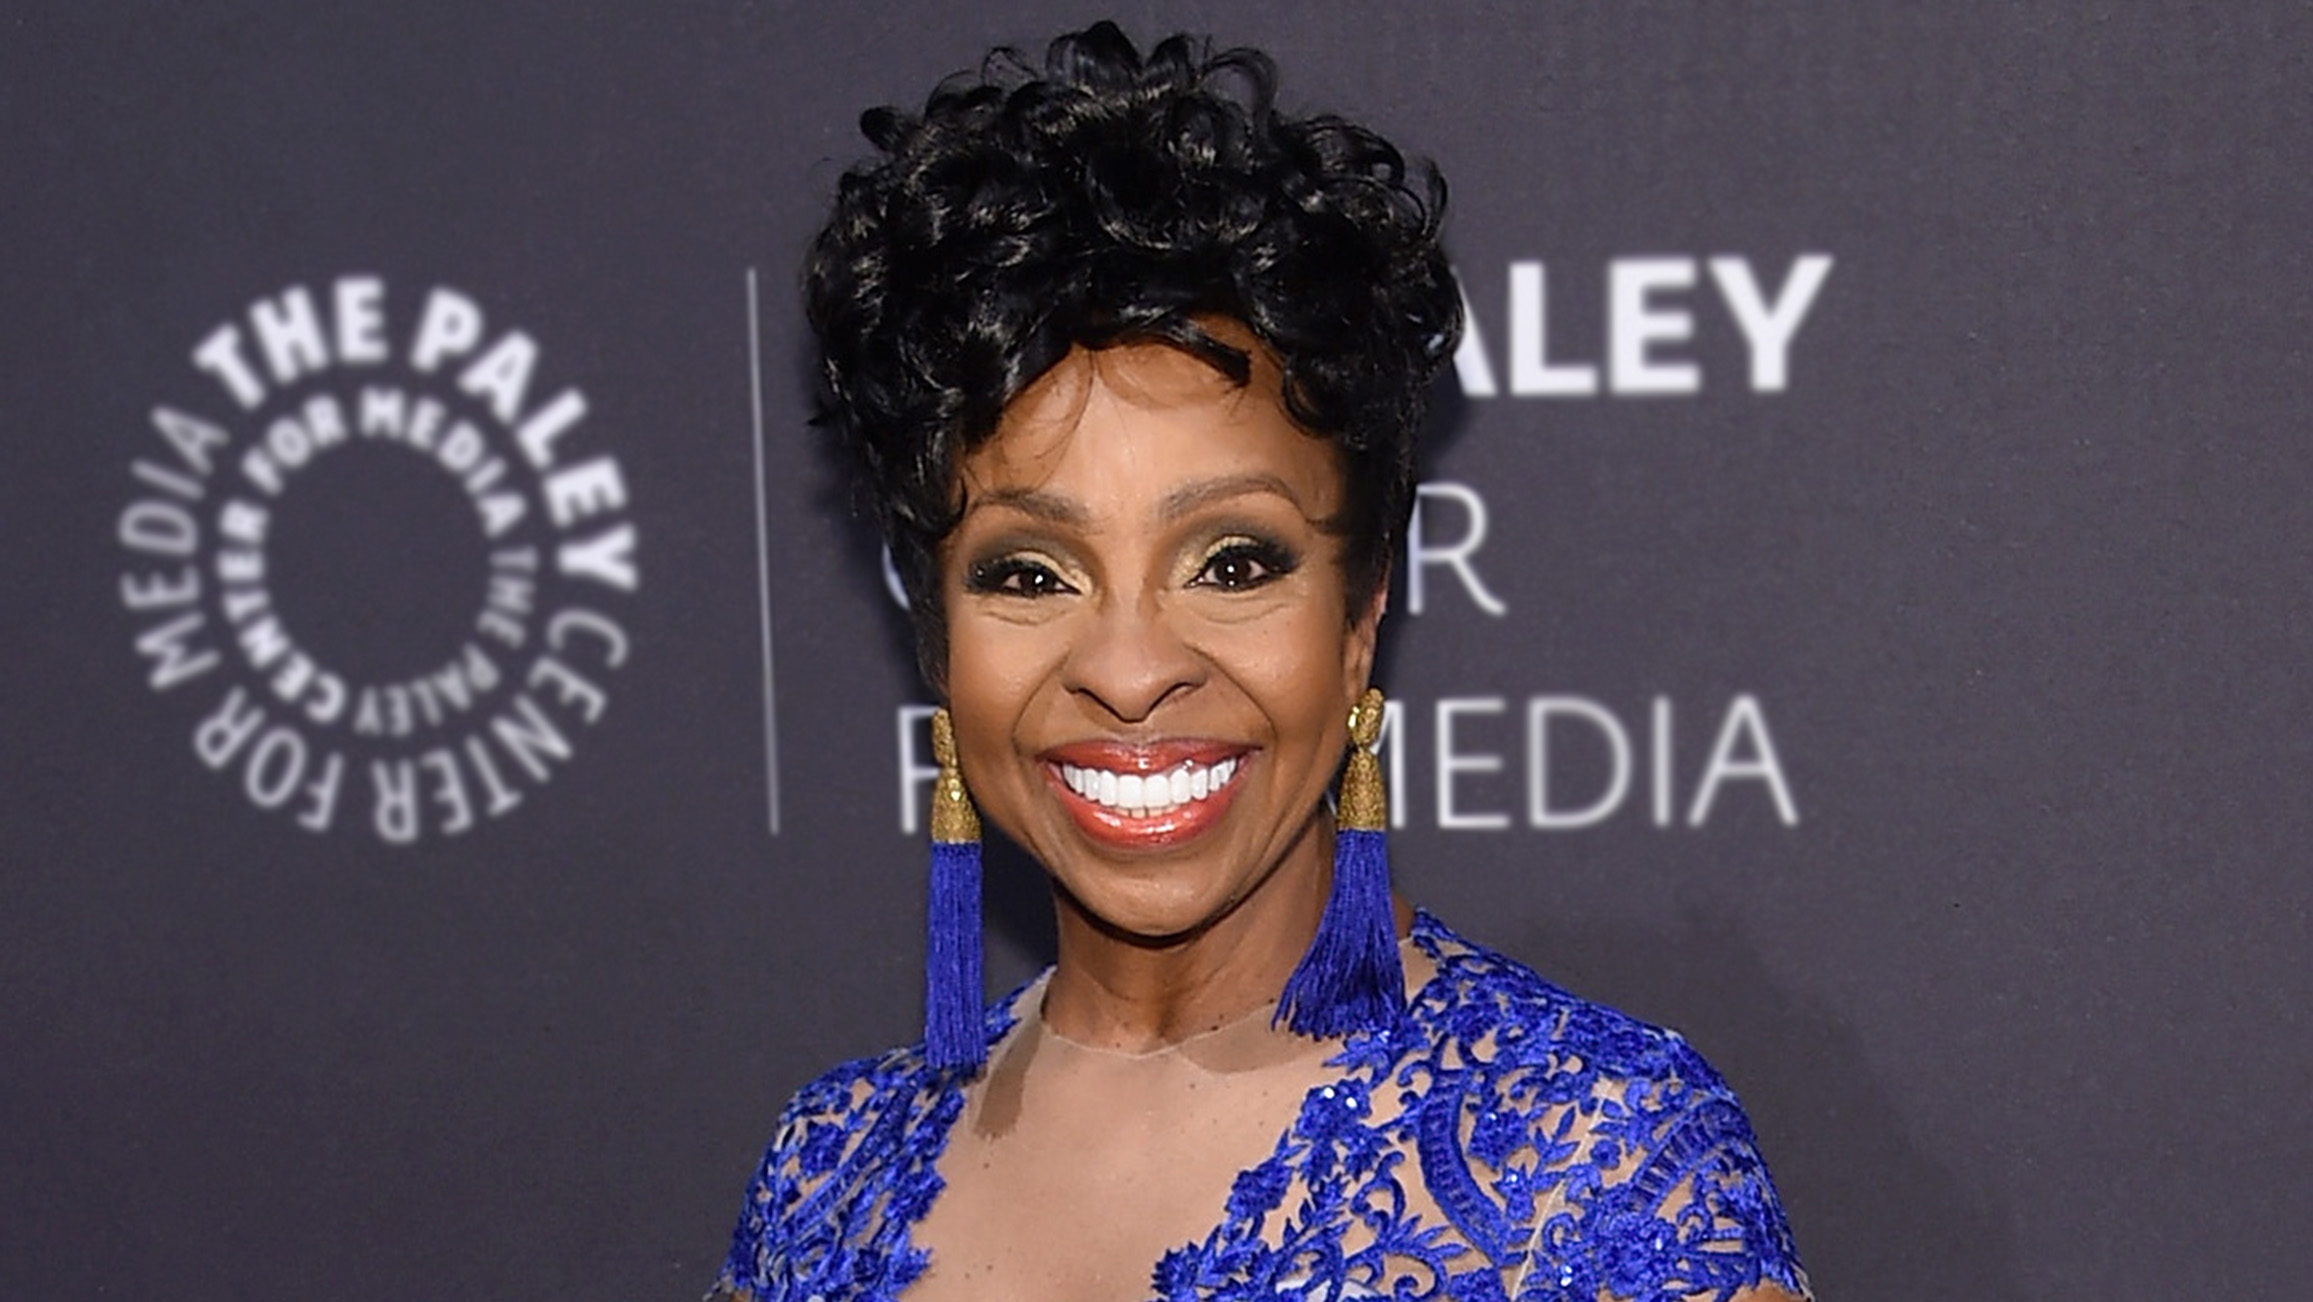 Gladys Knight Reveals She ‘Had the same disease as Aretha Franklin’